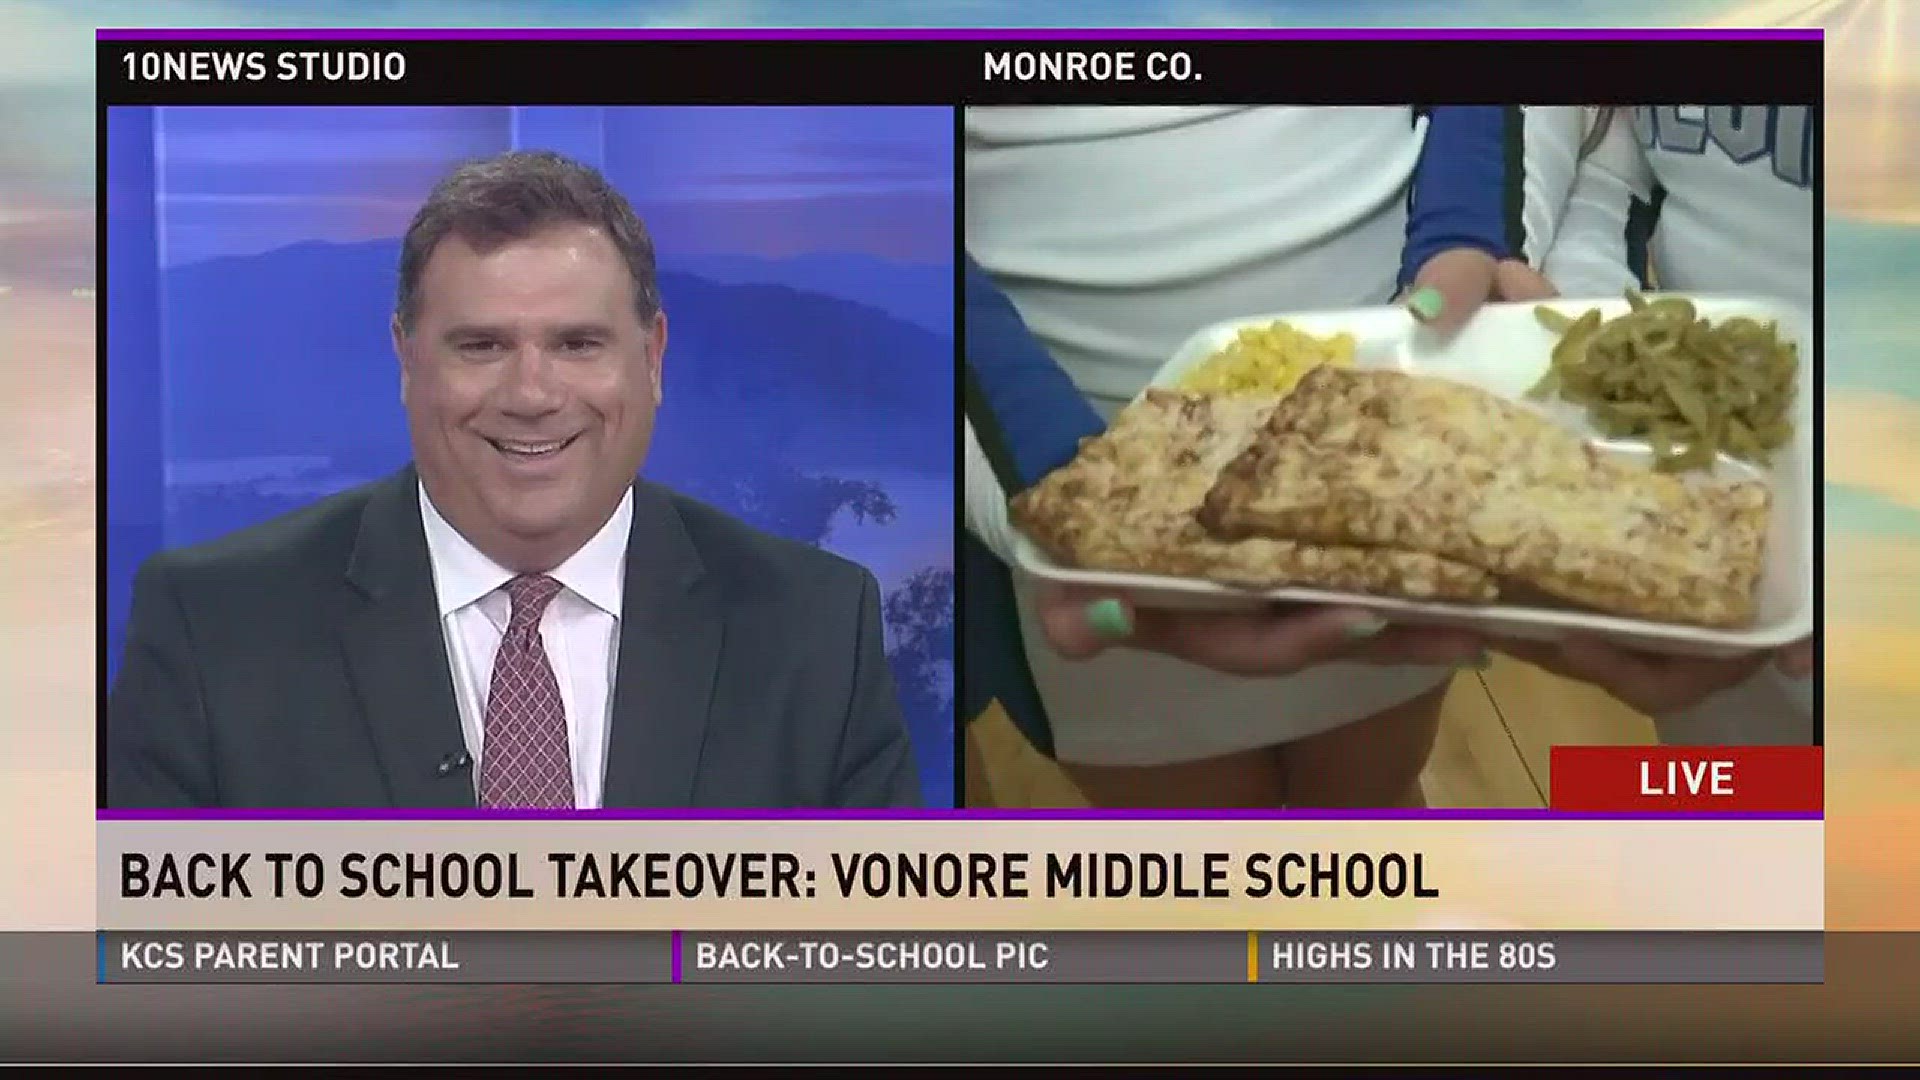 Russell Biven is surprised with a school lunch favorite on Vonore Middle School's first day back.